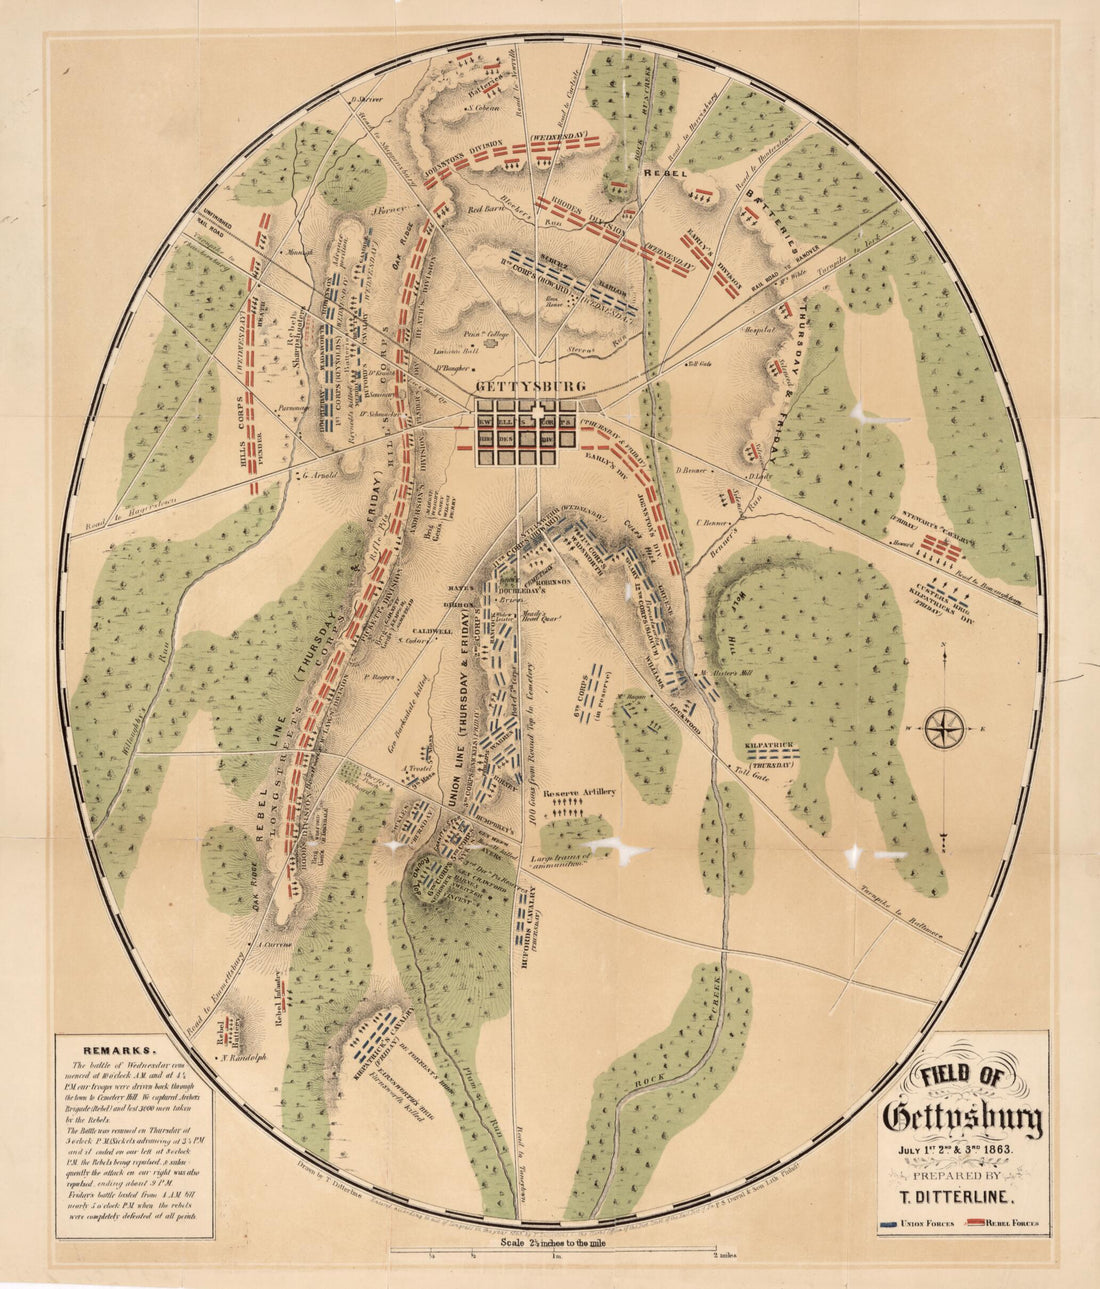 This old map of Field of Gettysburg, July 1st, 2nd &amp; 3rd from 1863 (Field of Gettysburg, July First, Second, and Third from 1863, Sketch of the Battles of Gettysburg With an Explanatory Map) was created by Corydon A. Alvord, T. (Theodore) Ditterline,  Jo